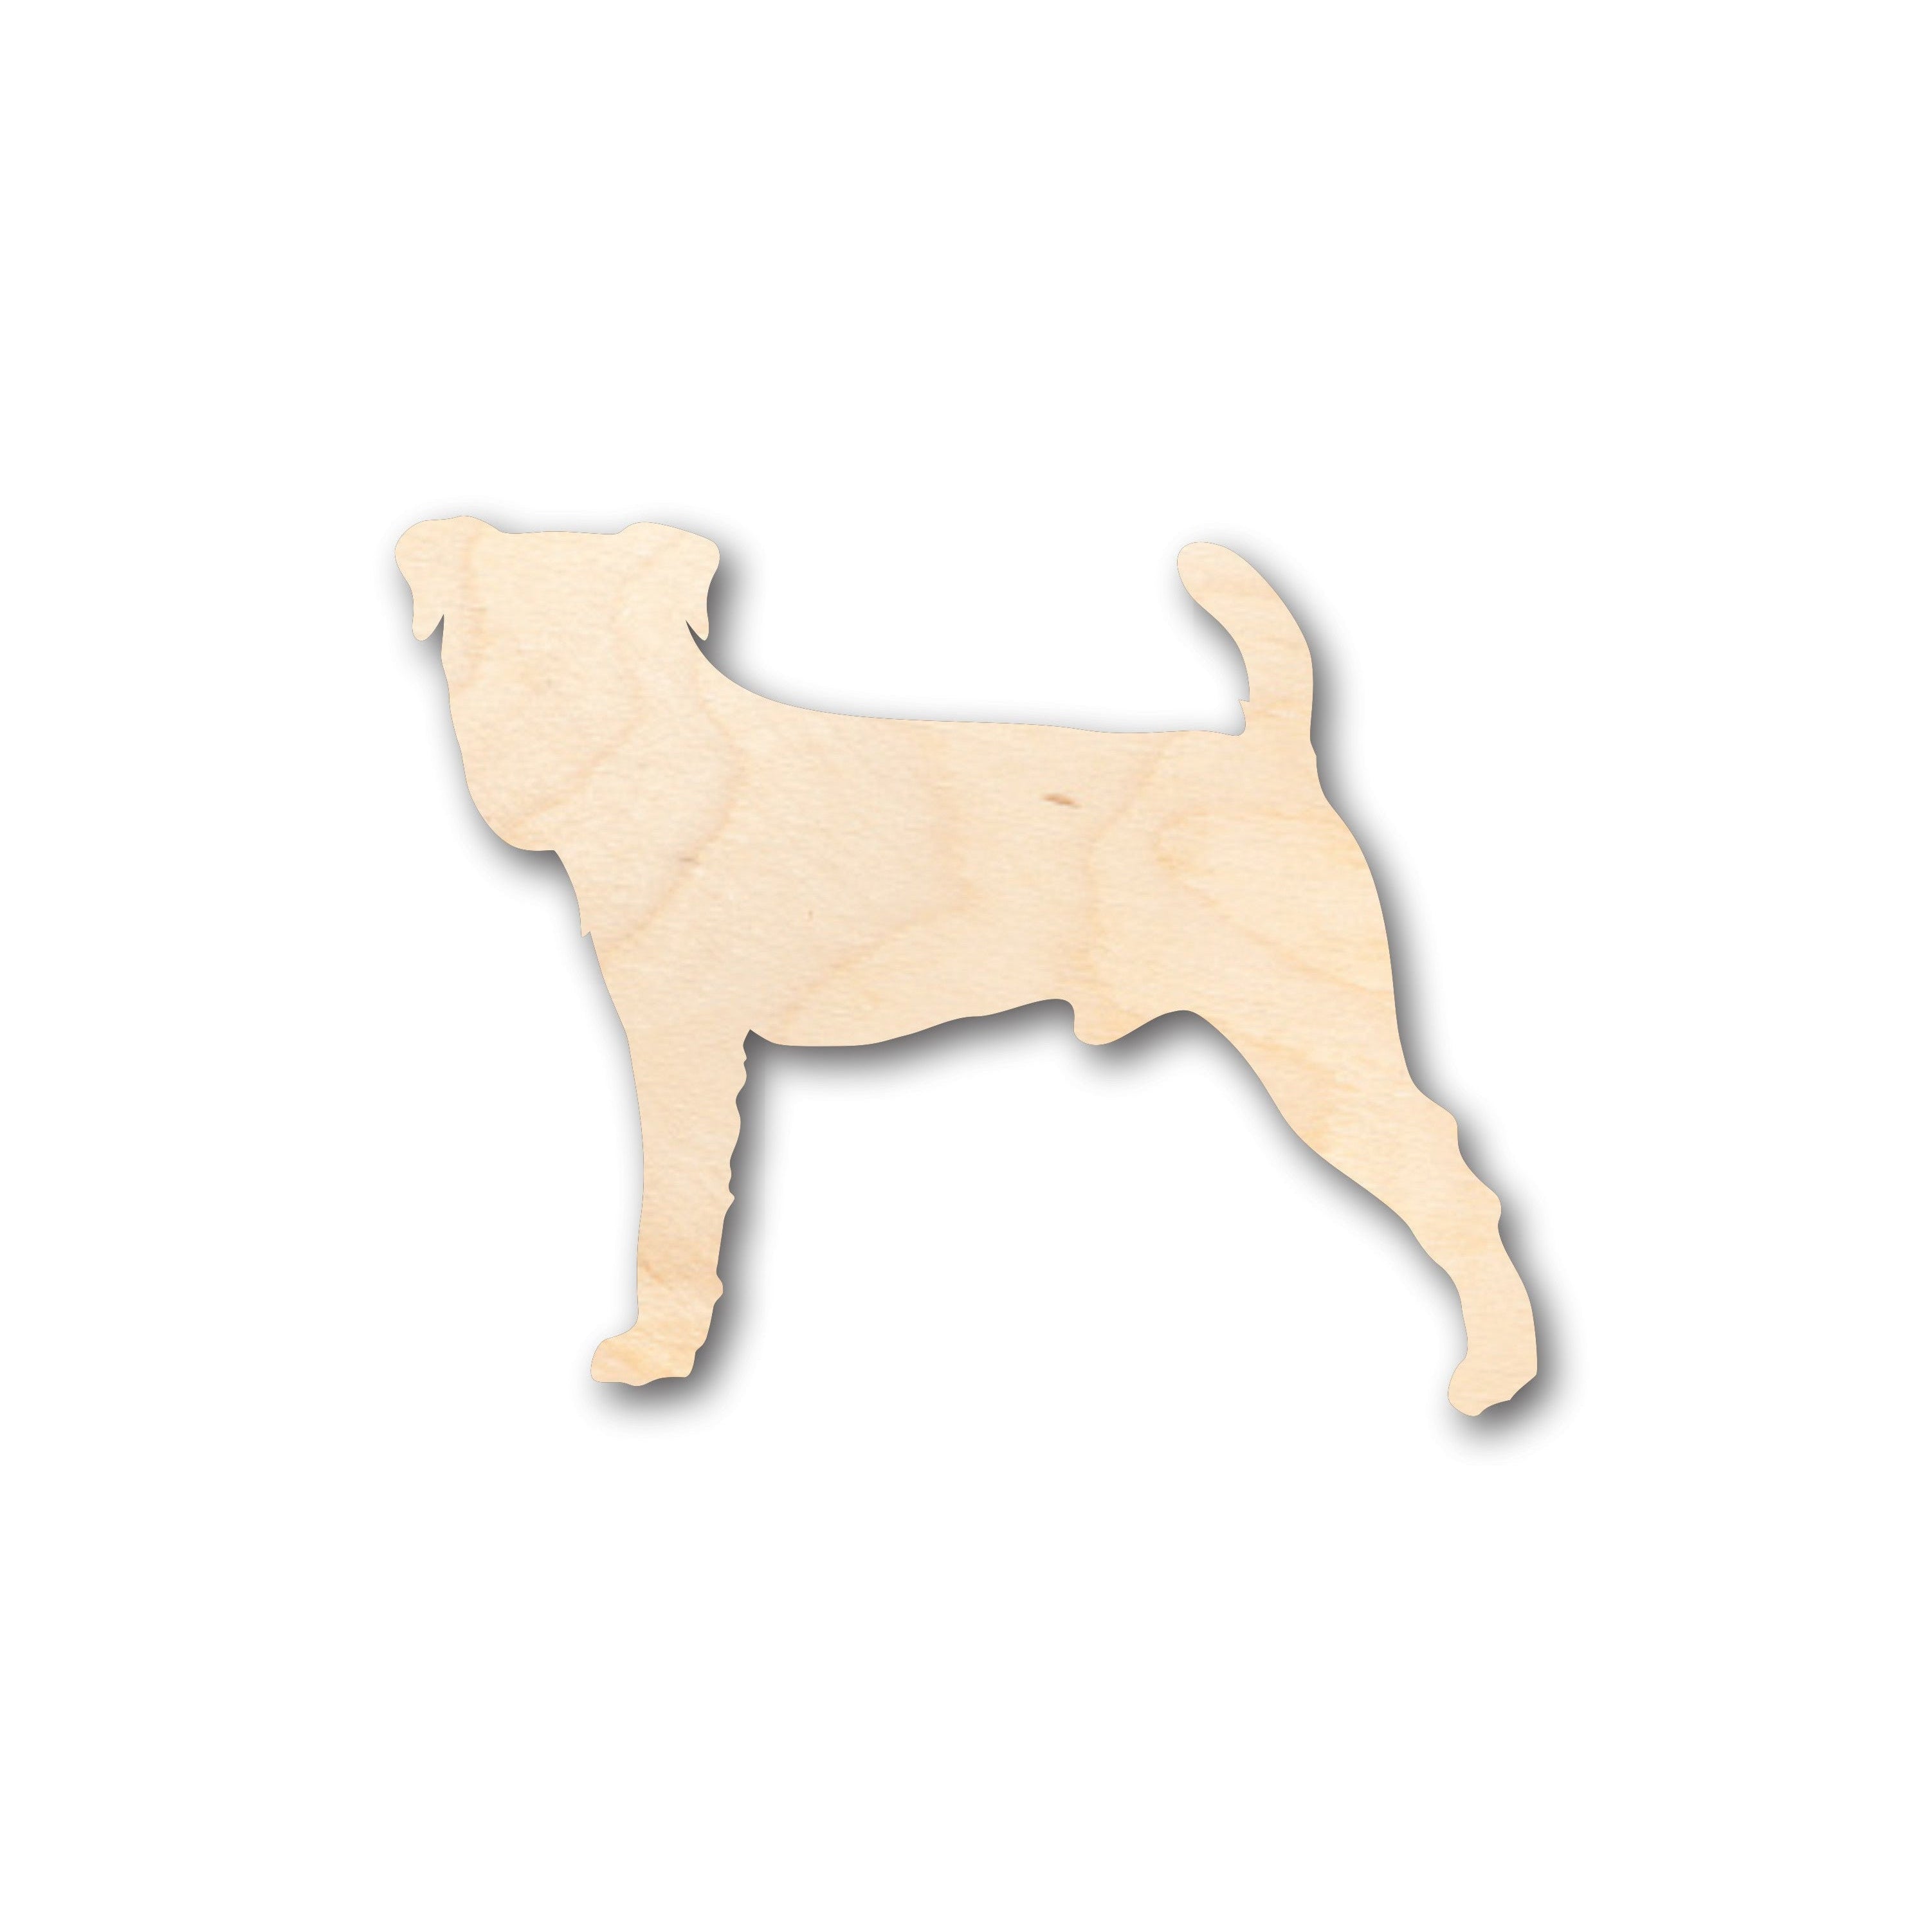 Unfinished Wood Jack Russel Terrier Small Dog Shape - Craft - up to 36